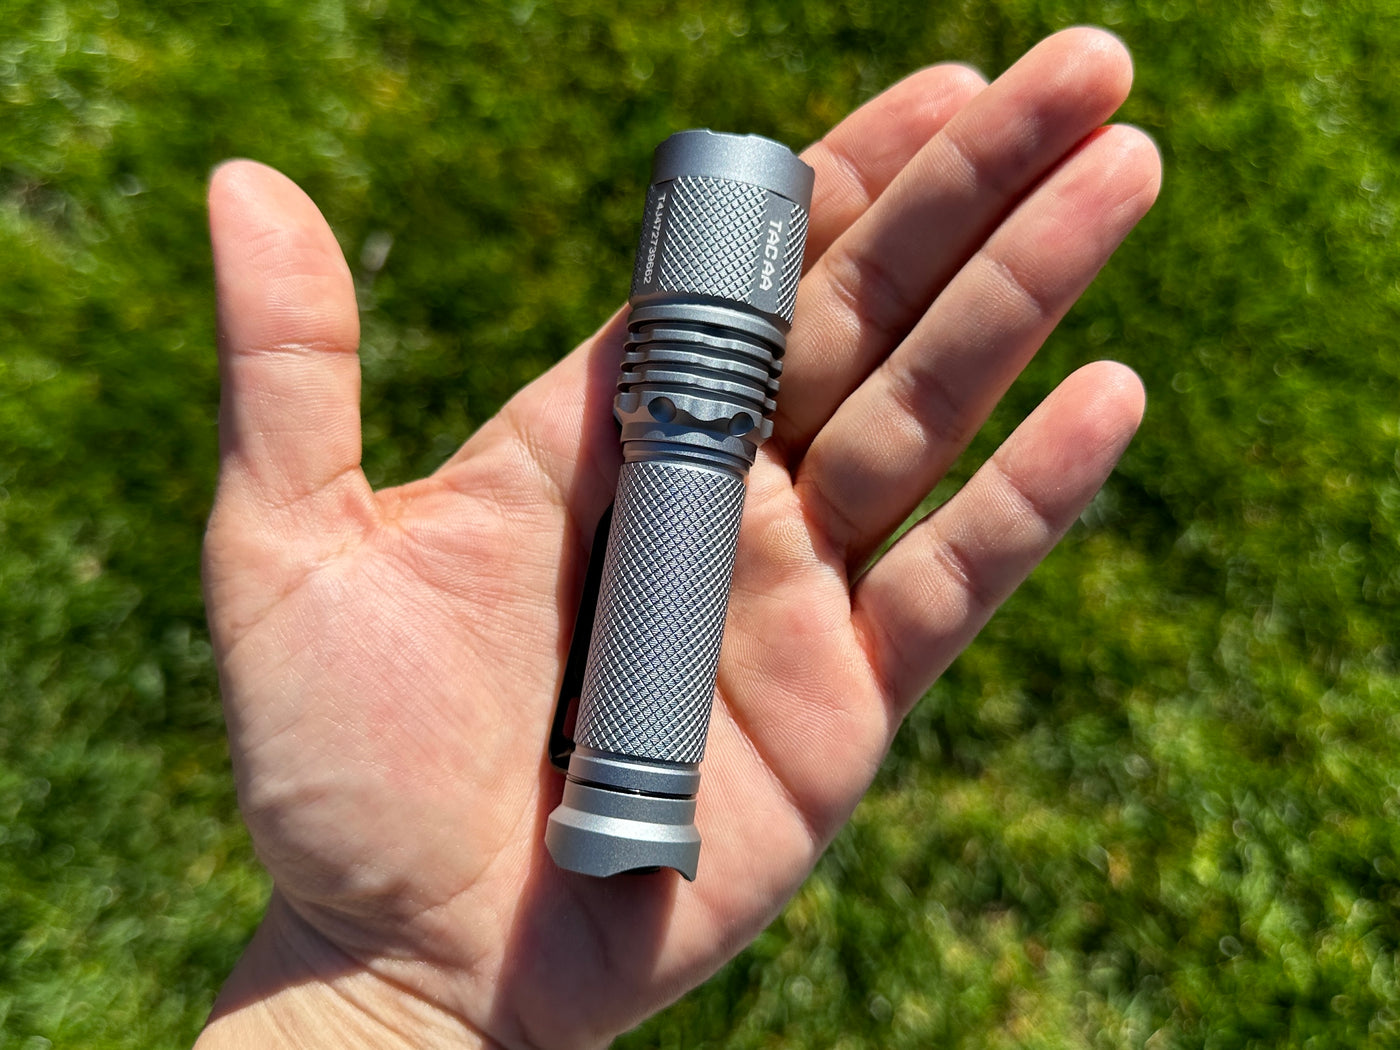 Exclusive Acebeam TAC Flashlight AA / 14500 ( Includes USB-C 14500 Rechargeable Battery )